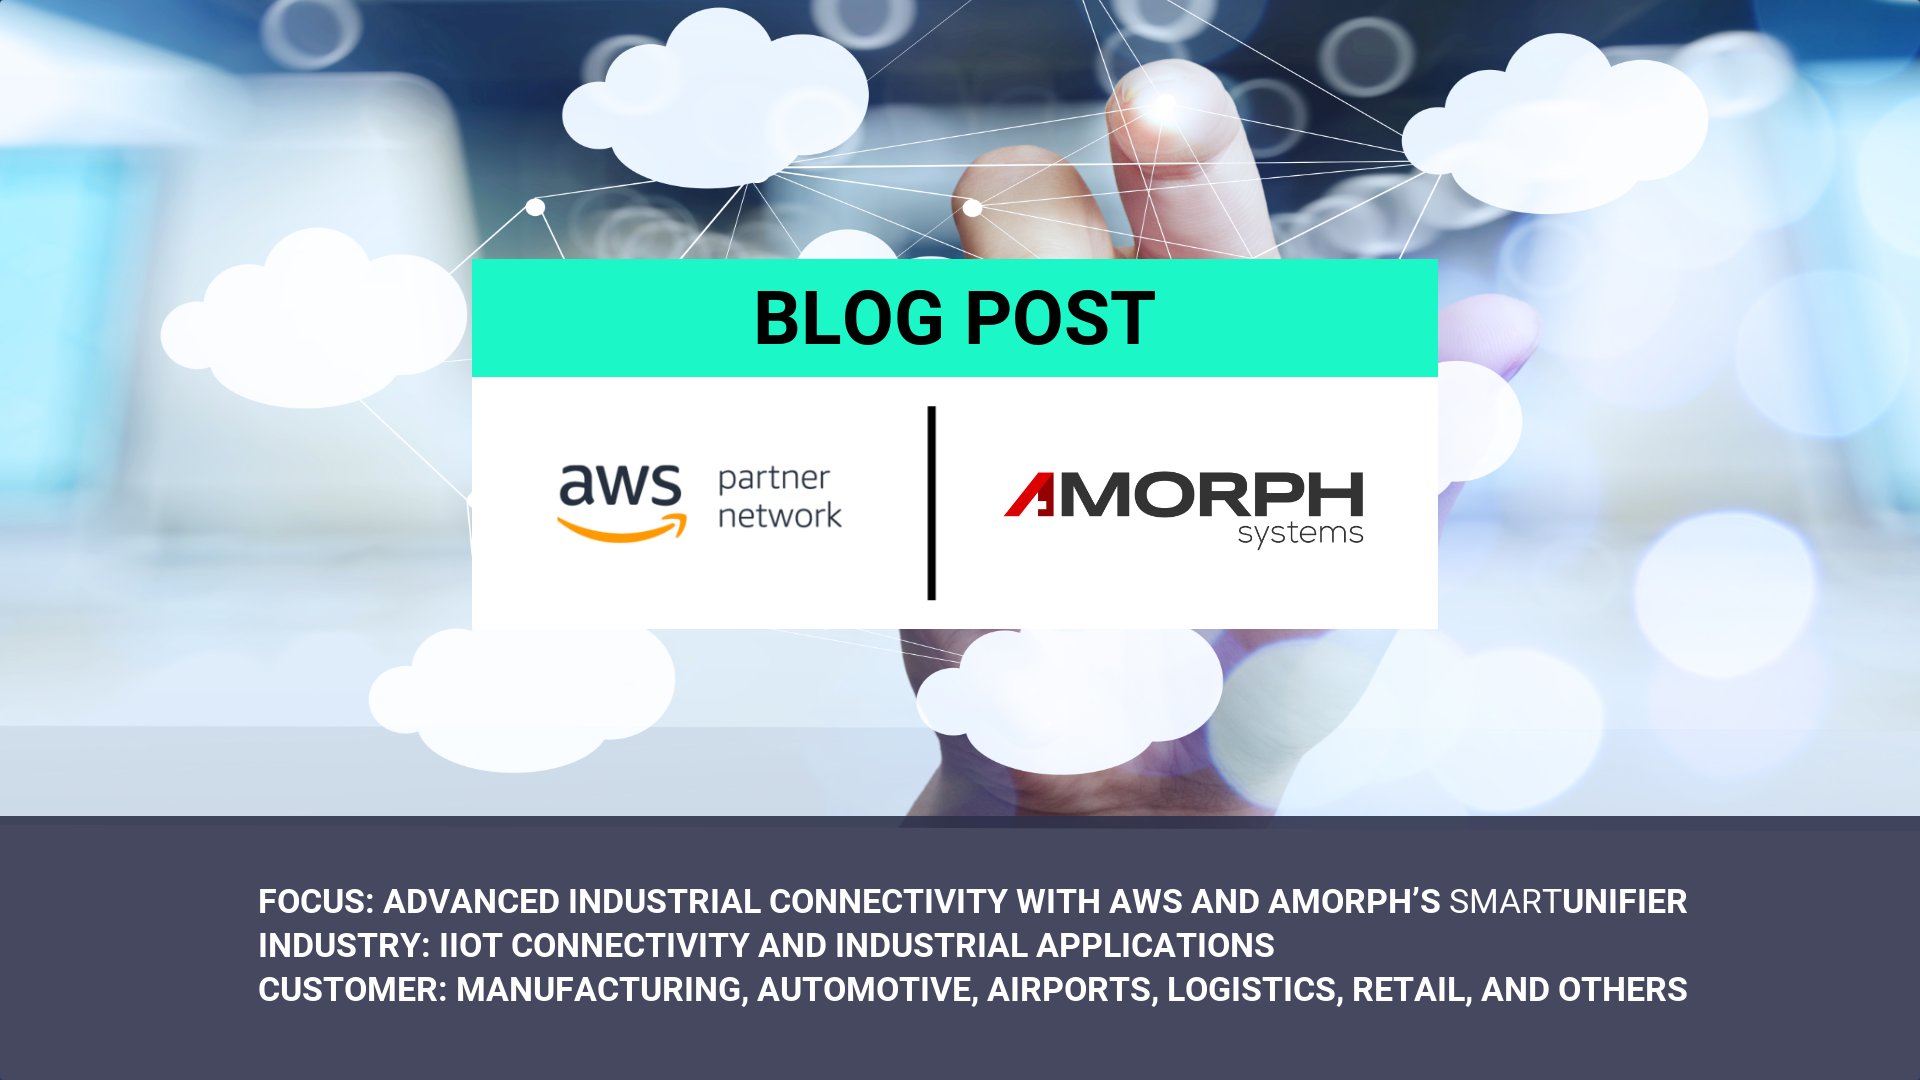 AWS and Amorph Systems collaboration